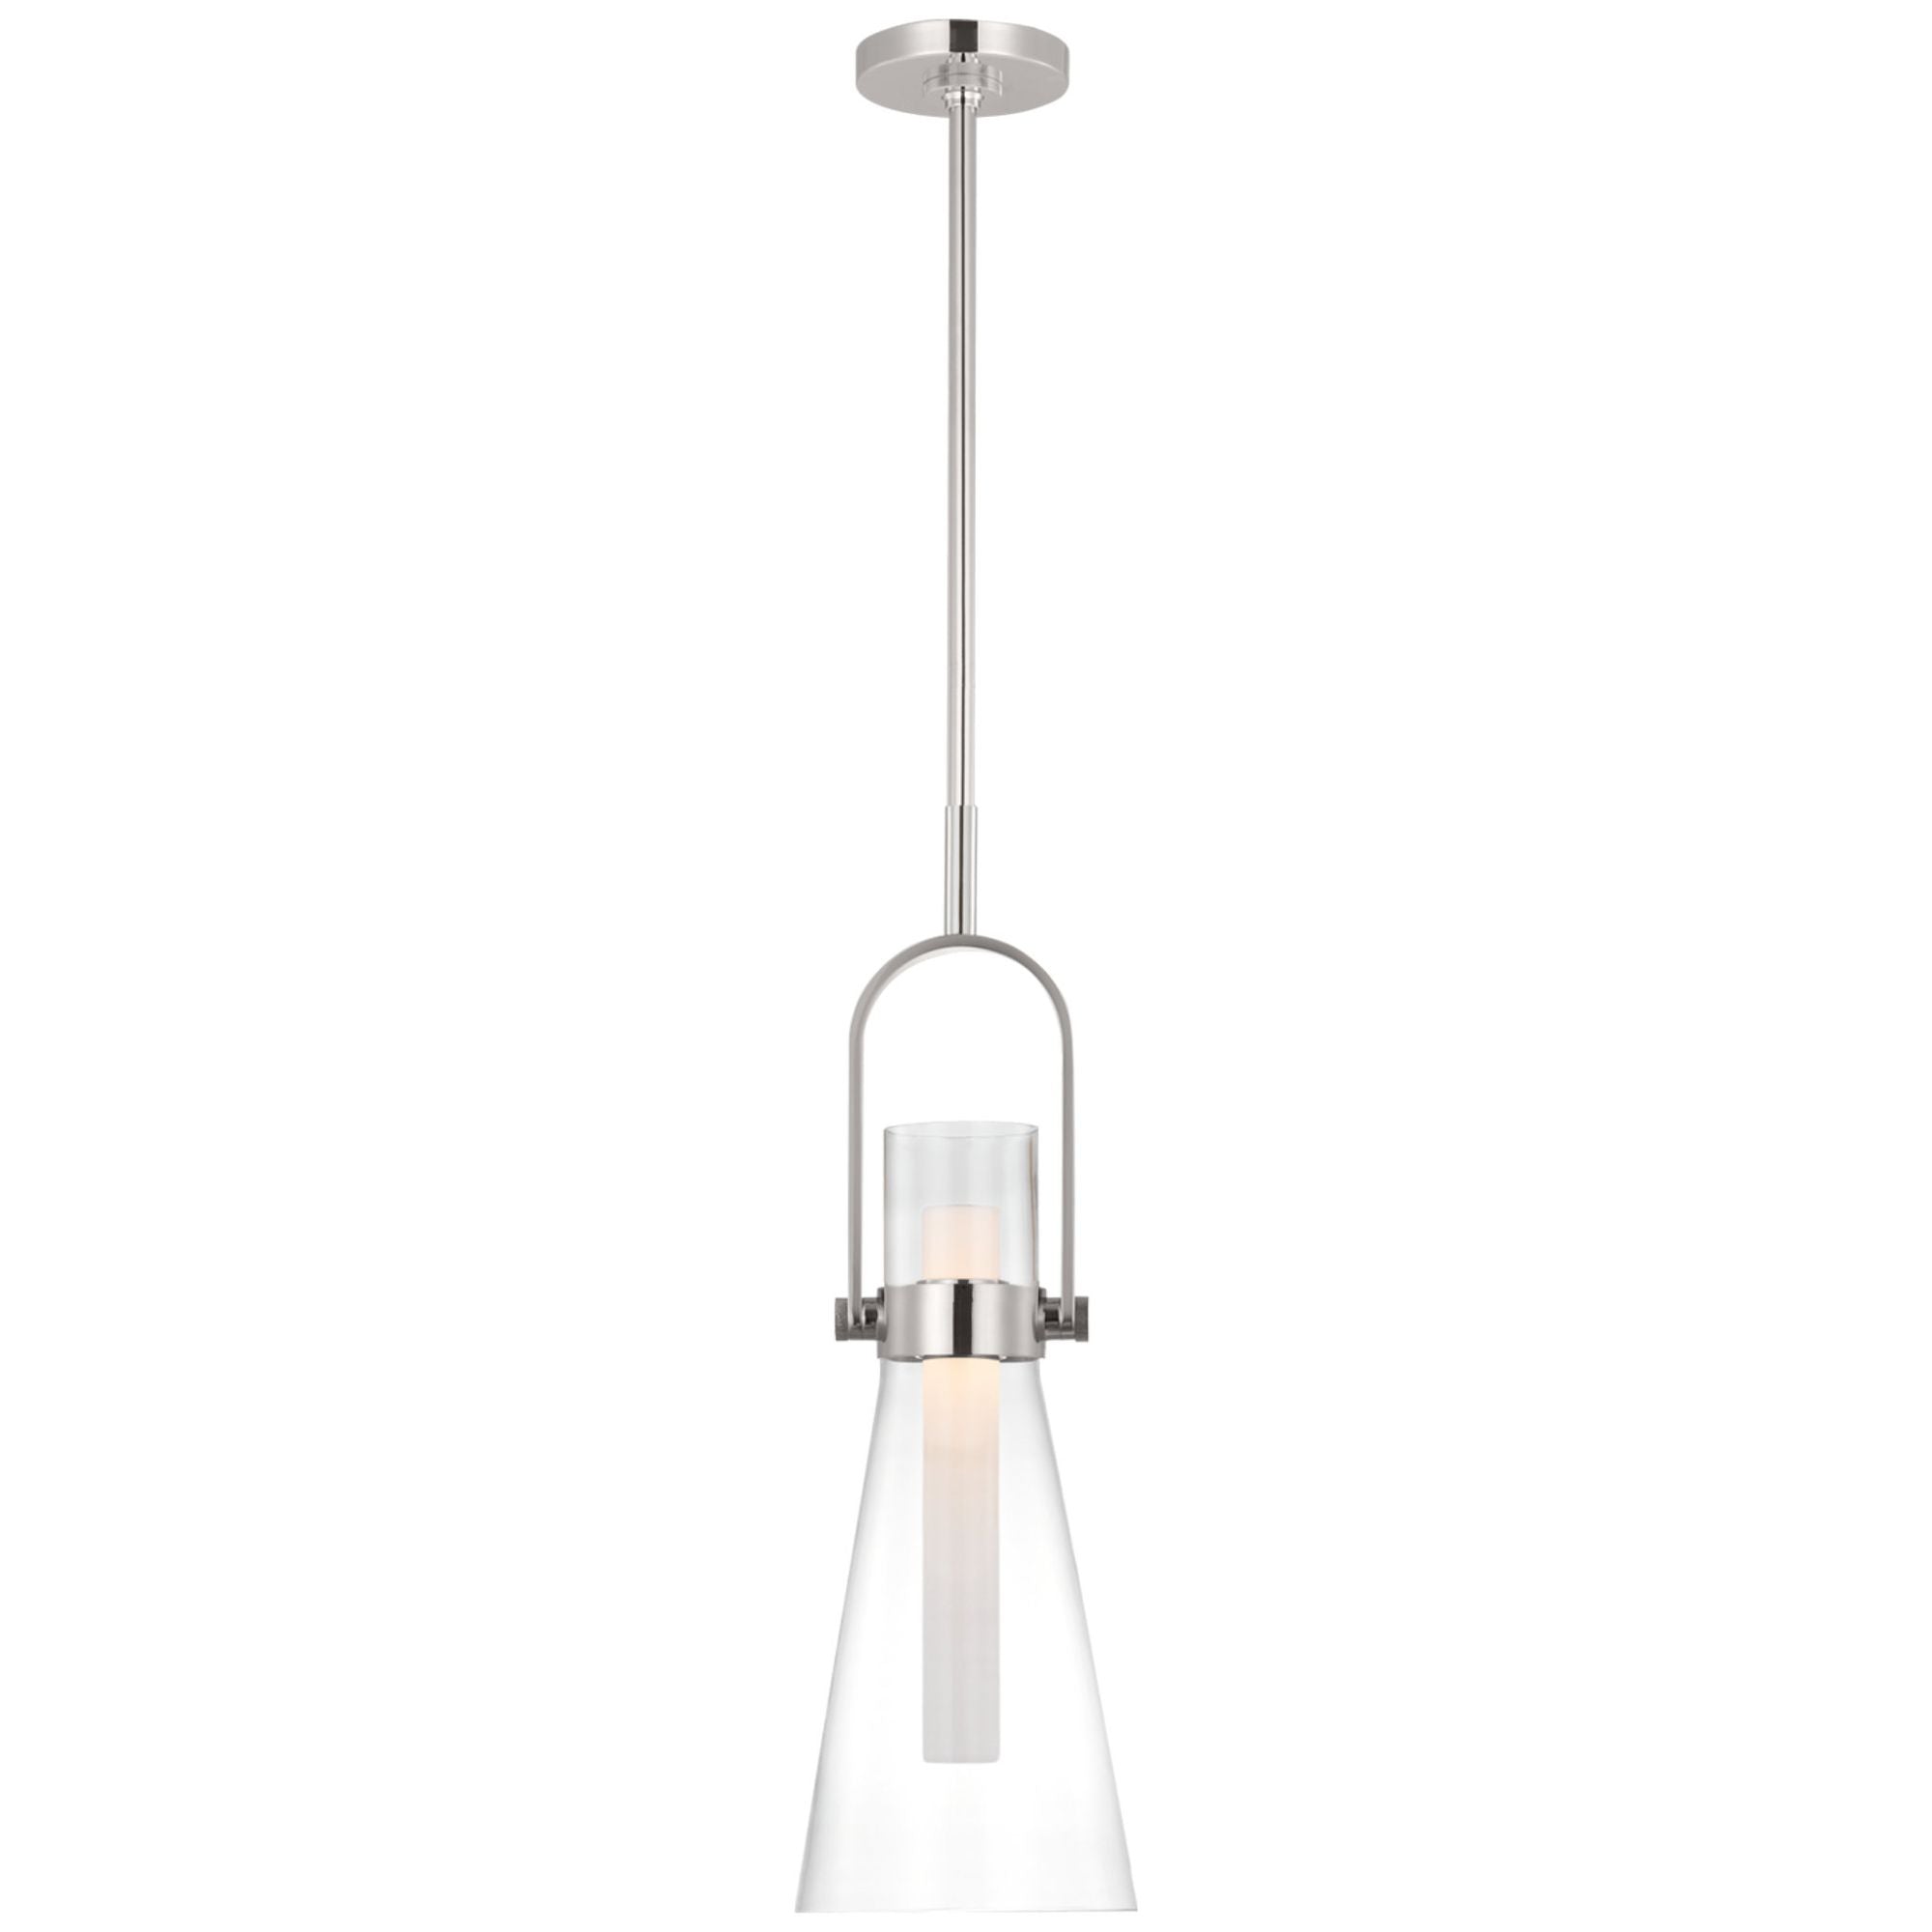 Ian K. Fowler Larkin 9" Conical Pendant in Polished Nickel with Clear Glass